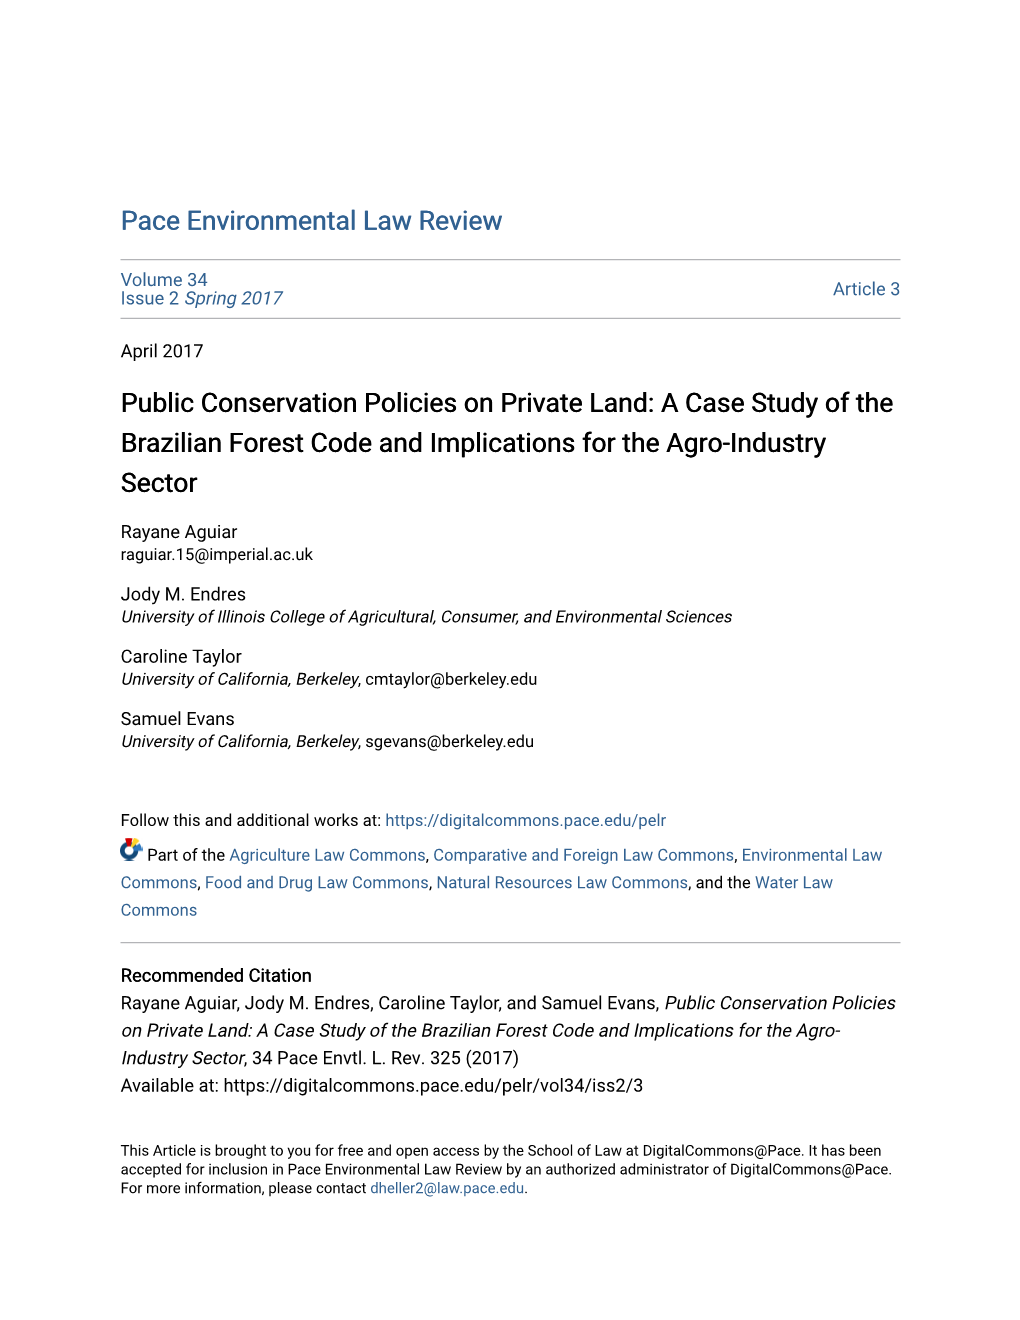 A Case Study of the Brazilian Forest Code and Implications for the Agro-Industry Sector